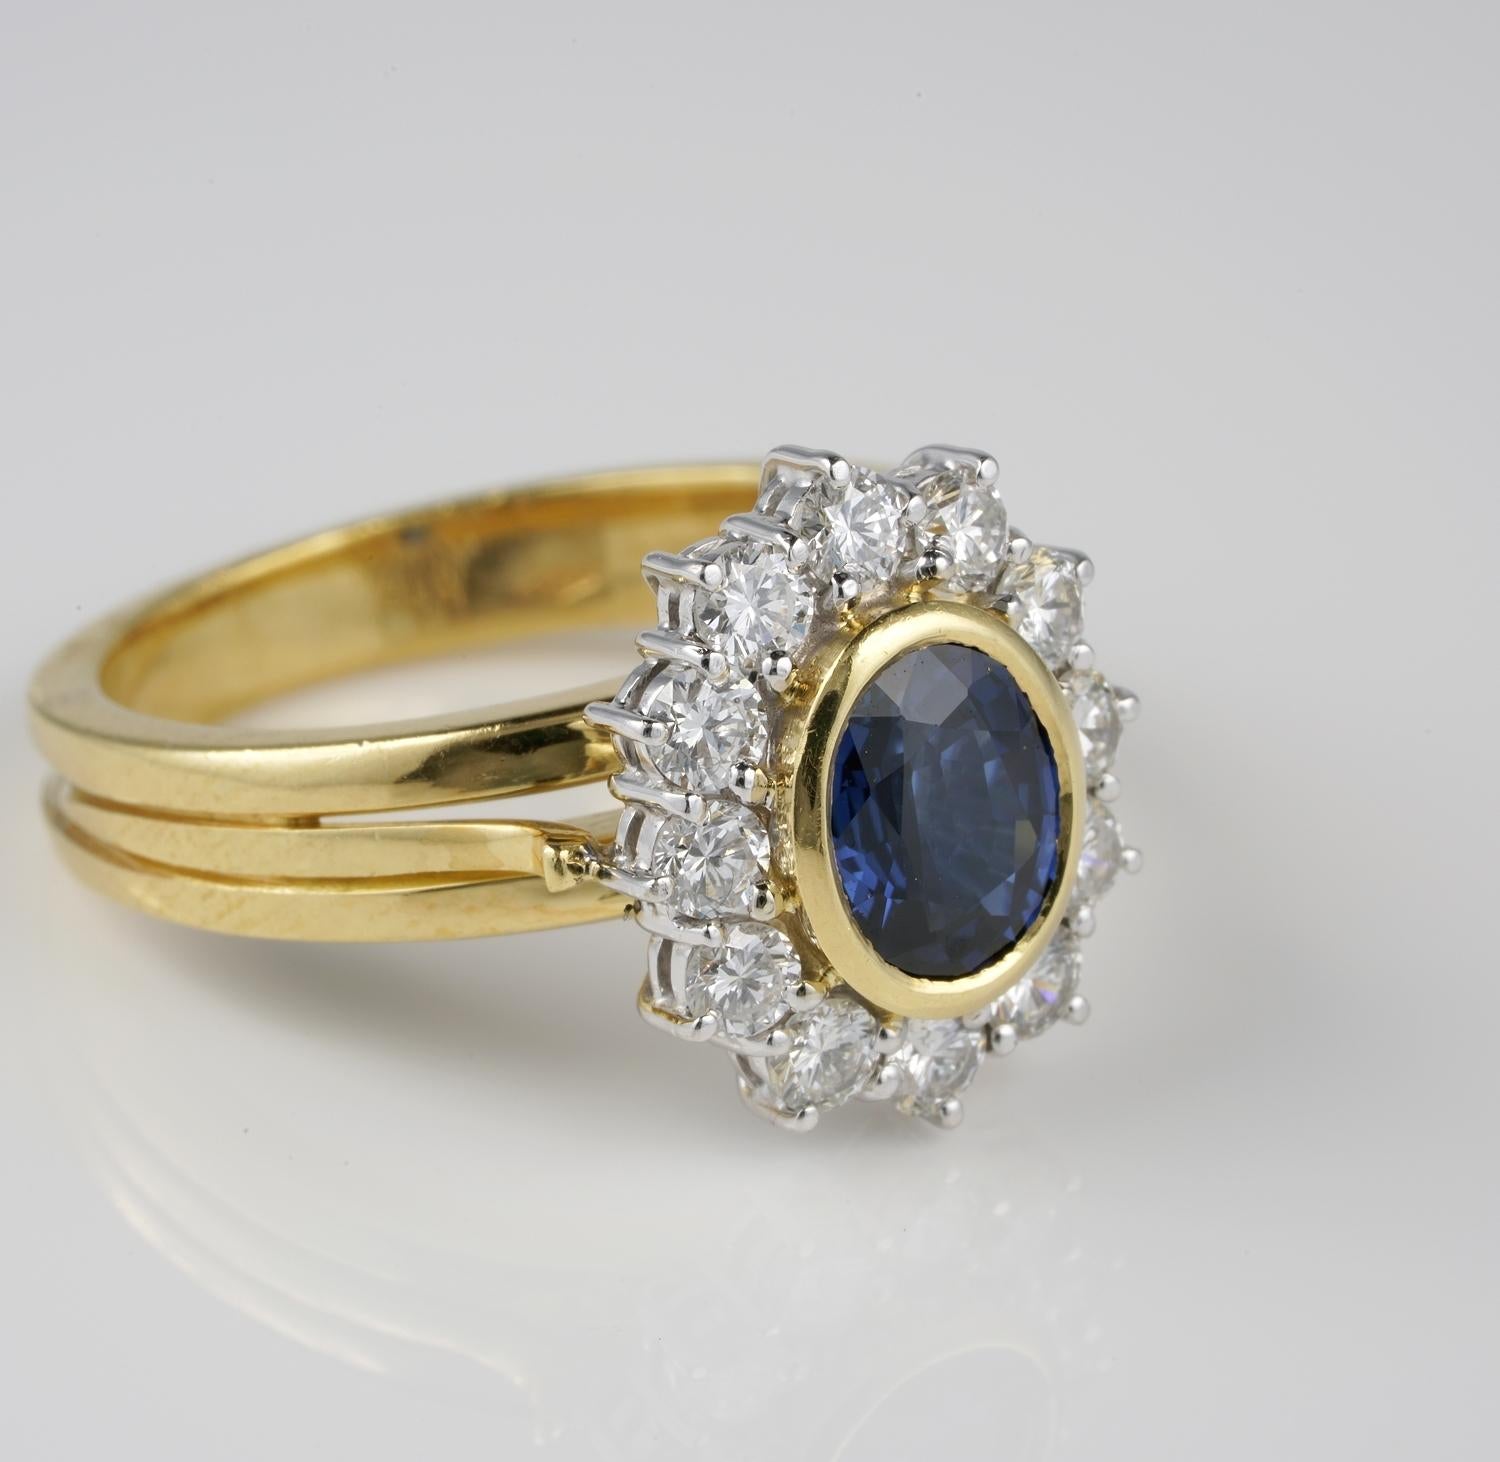 Timeless Blue Sapphire
This simply gorgeous Sapphire & Diamond ring dates mid-century, 70’s approx
Beautifully hand made, heavy mount of solid 18 KT gold, timeless, classy, cluster design t exalt the beauty of both the Sapphire & Diamond
Could be an